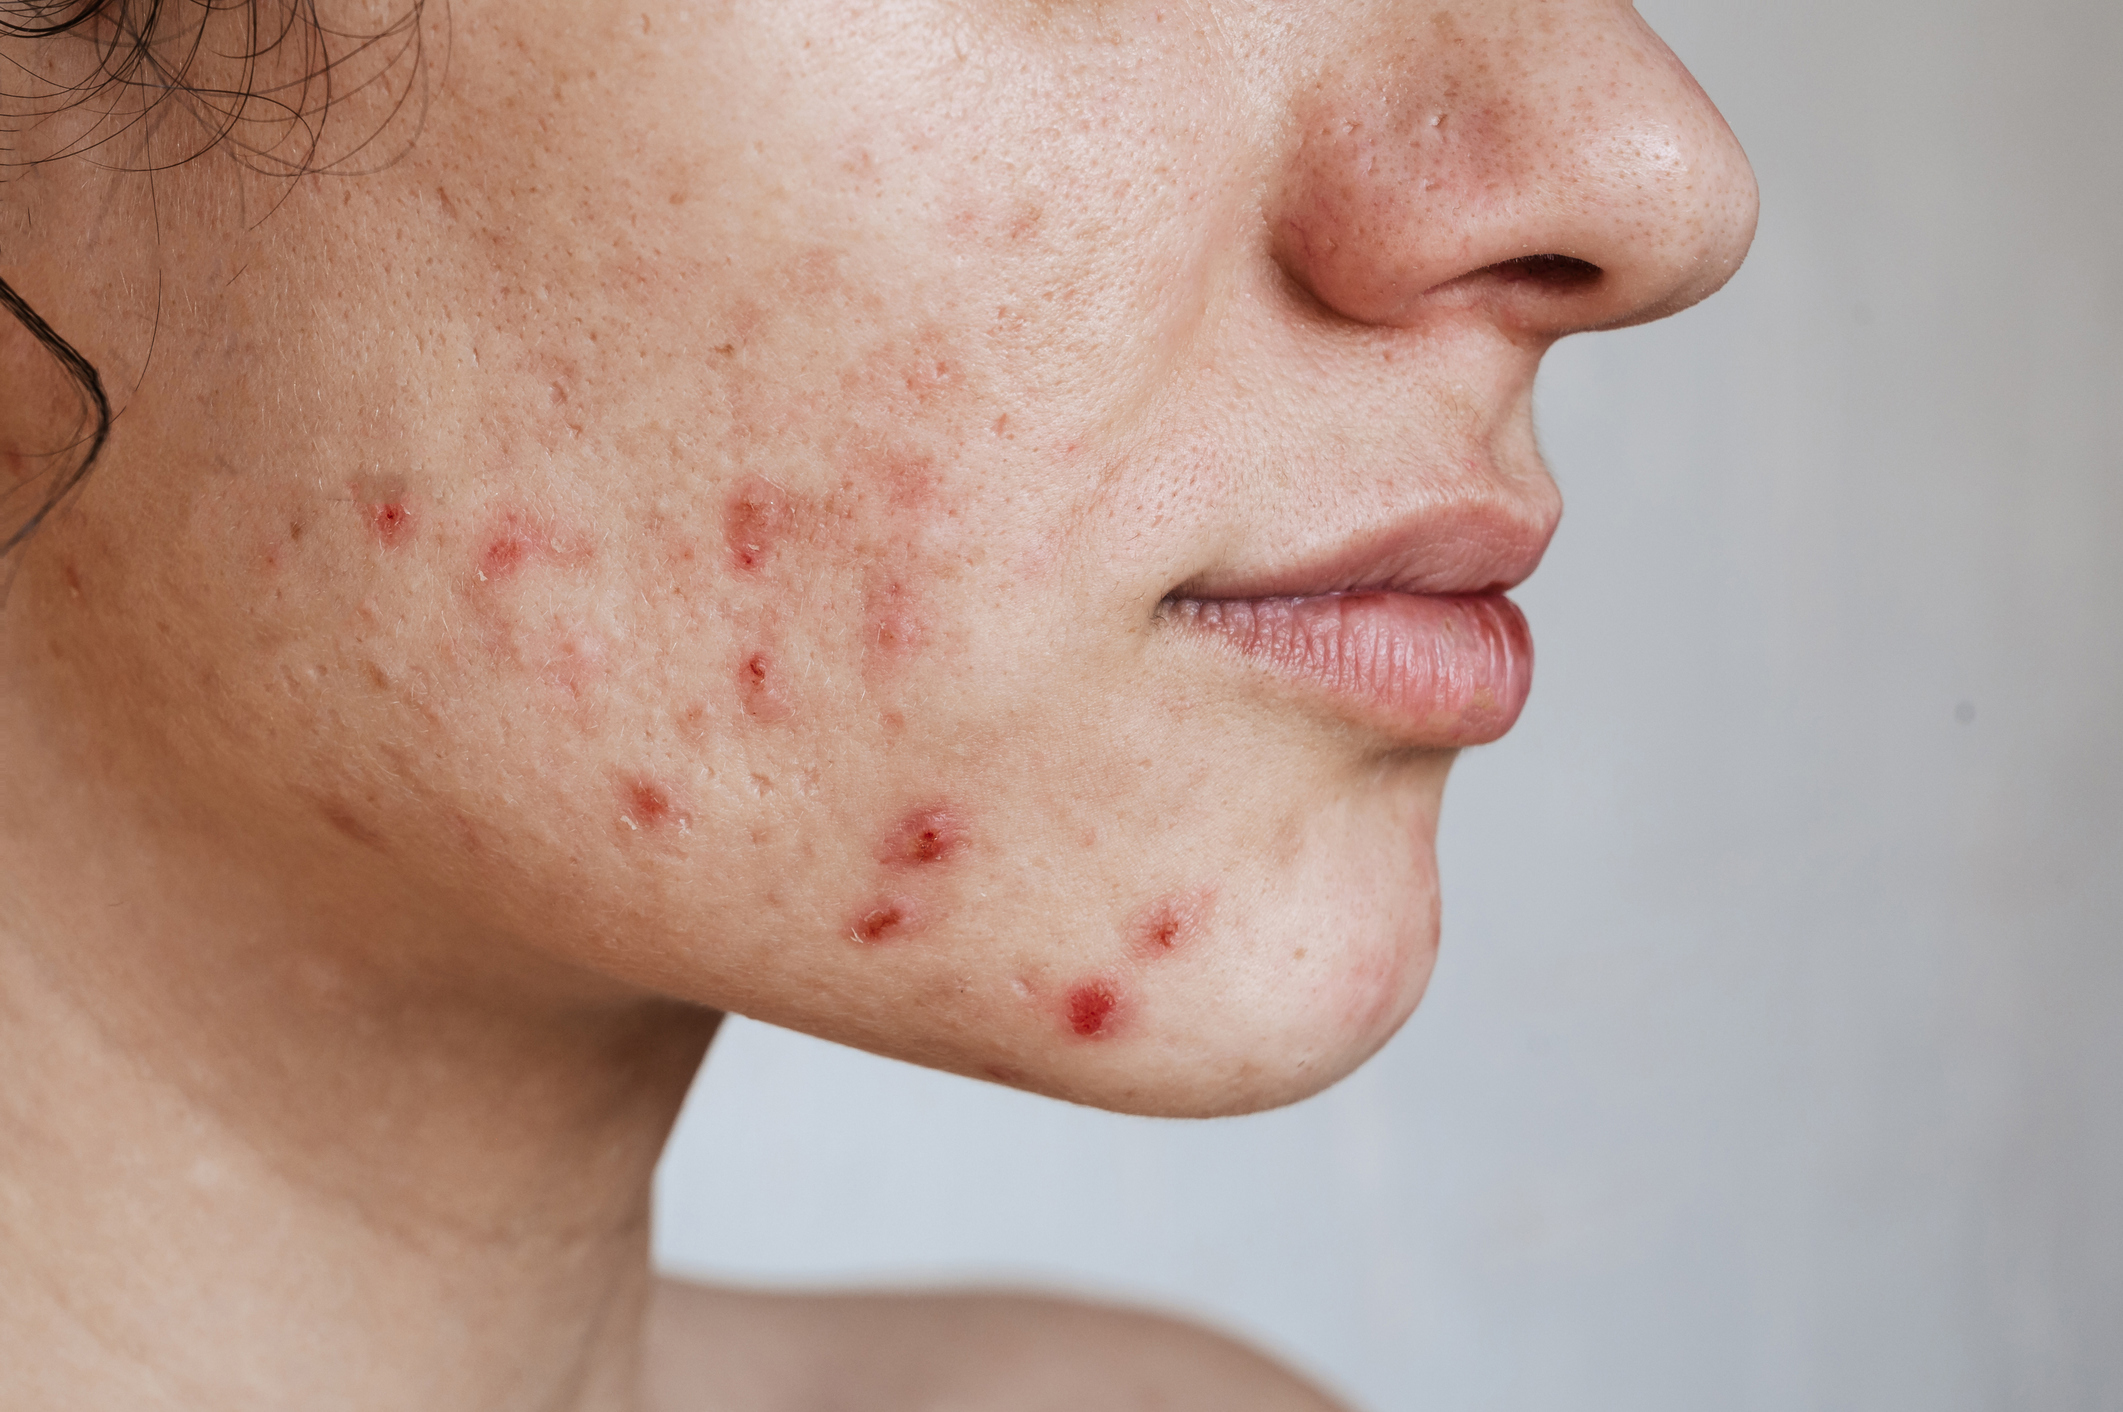 New technology treating stubborn acne without pills in Australian first